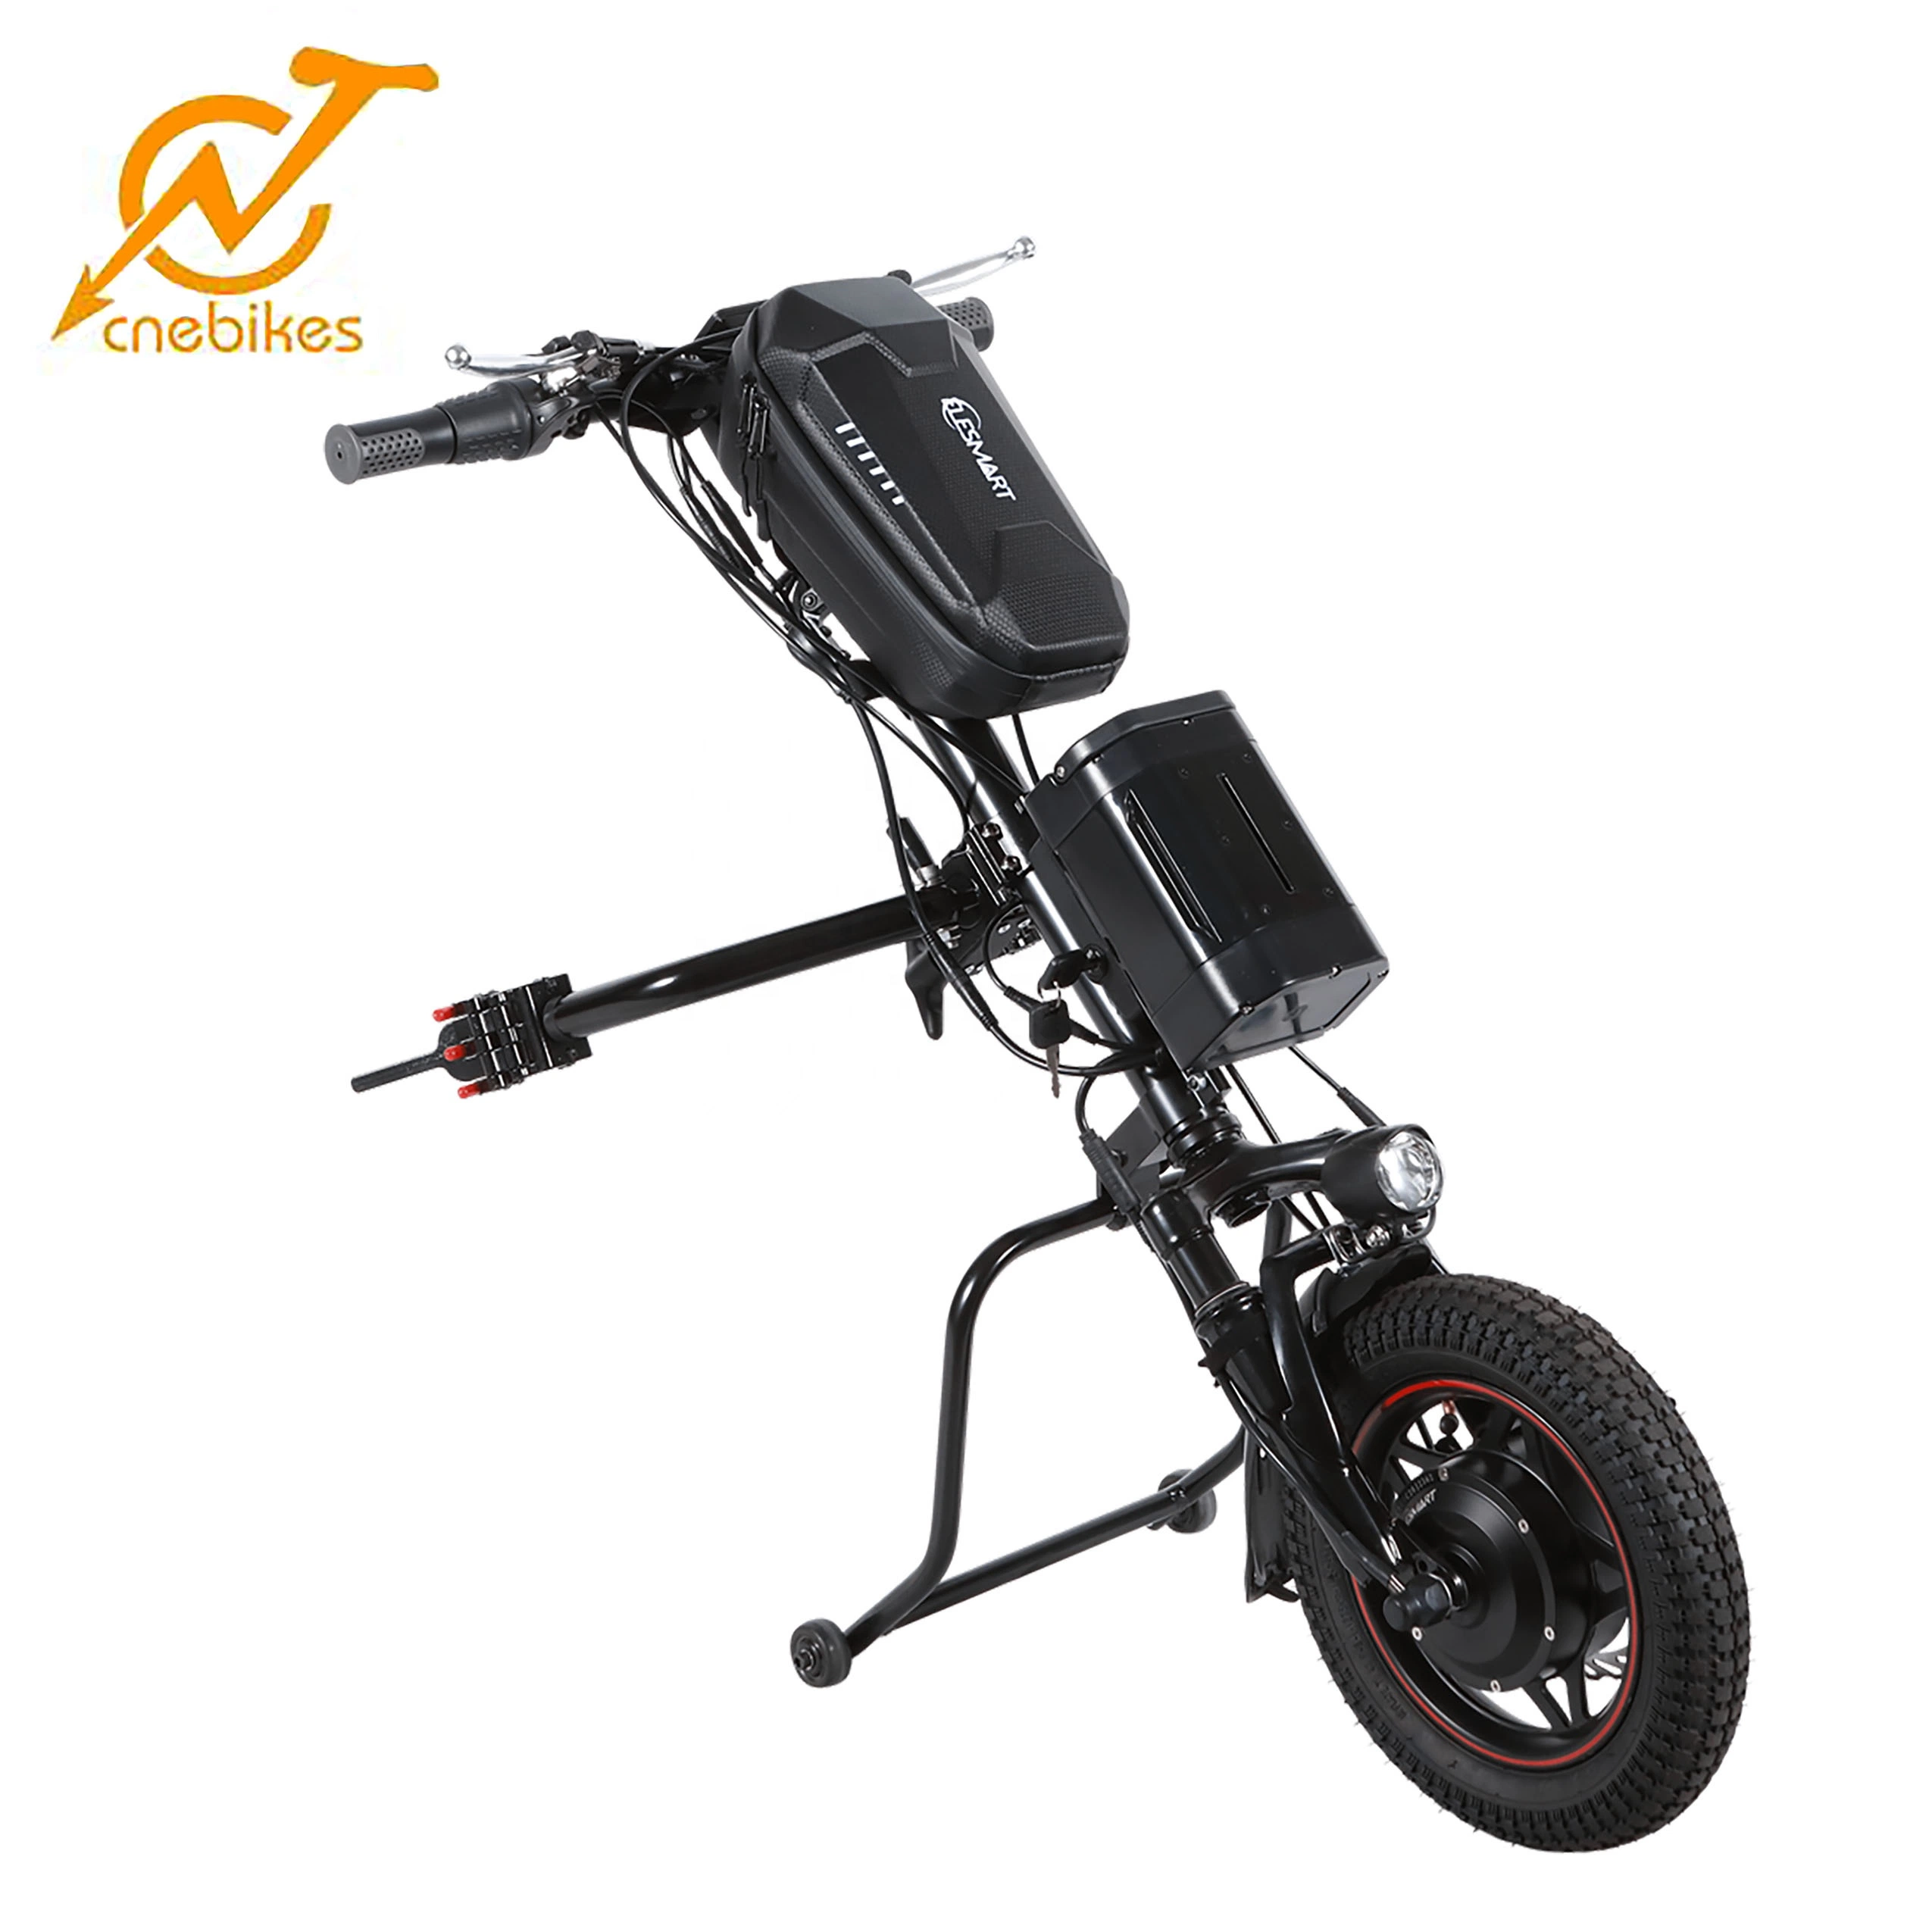 16inch 350W Motor Electric Wheelchair Handcycle with LCD007 Display with USB Function for Disabled Person